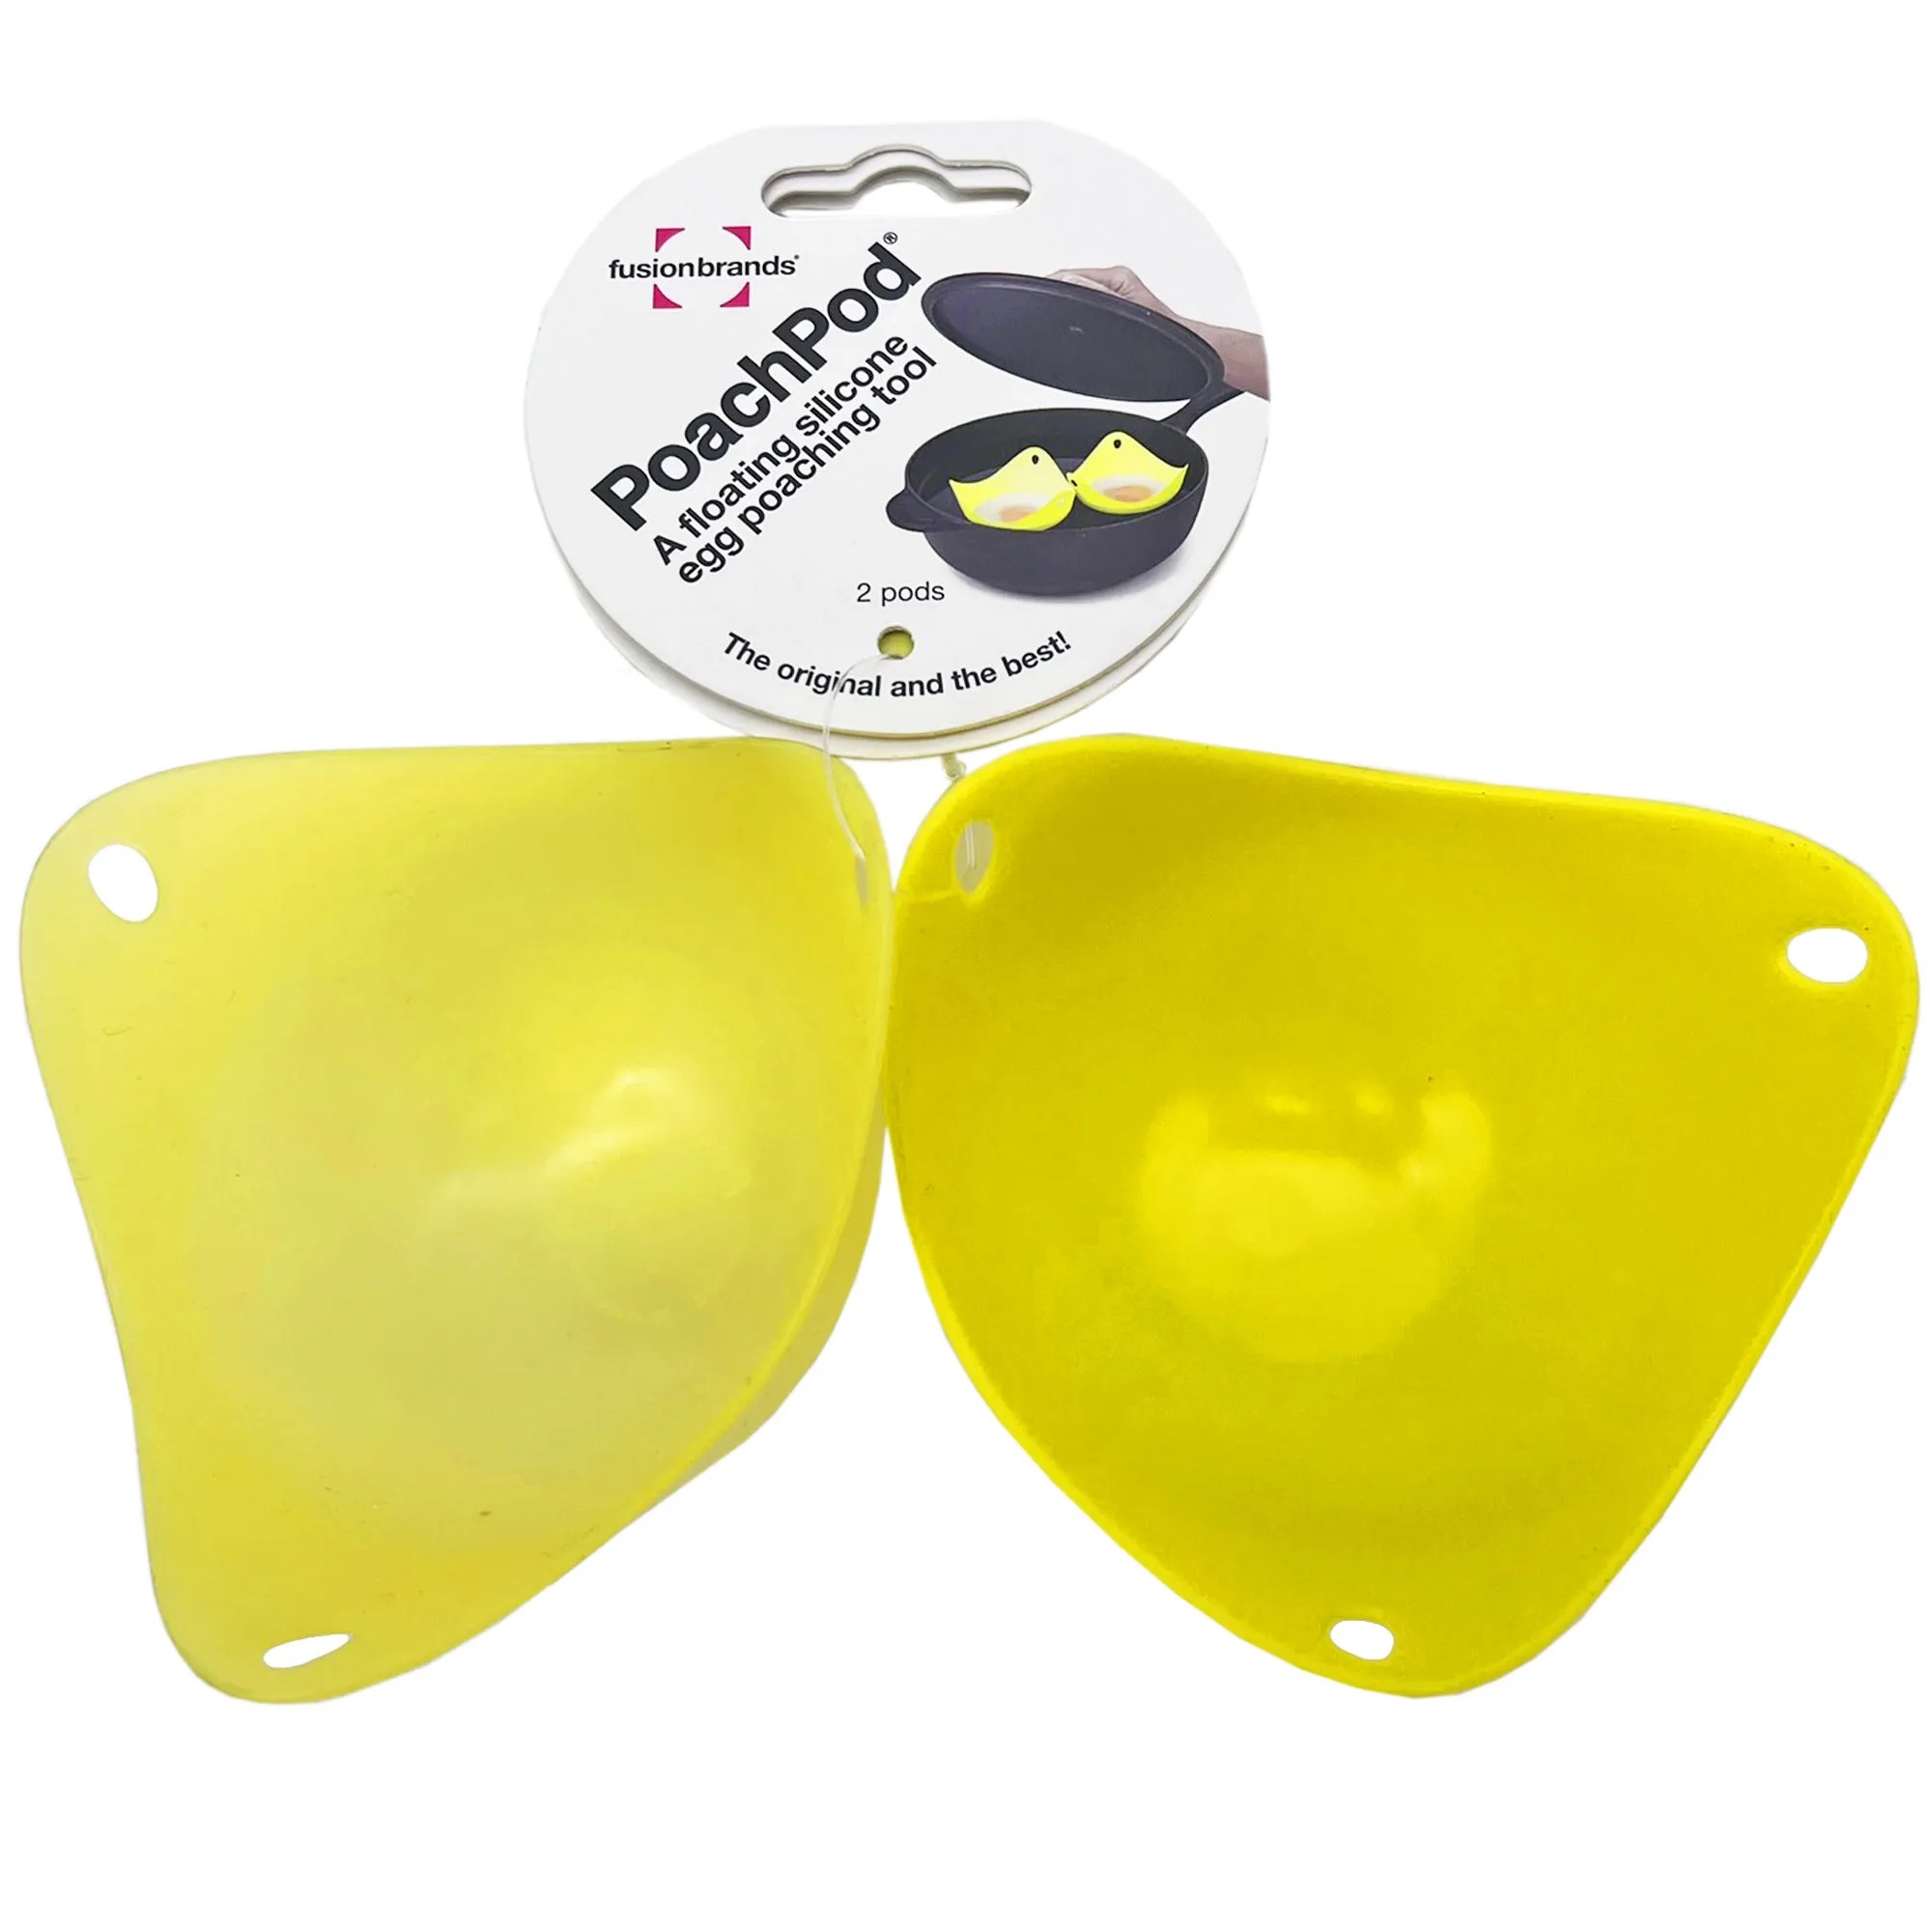 fushion brands PoachPod - A Floating Silicone Egg Poaching Tool - 2 Pods